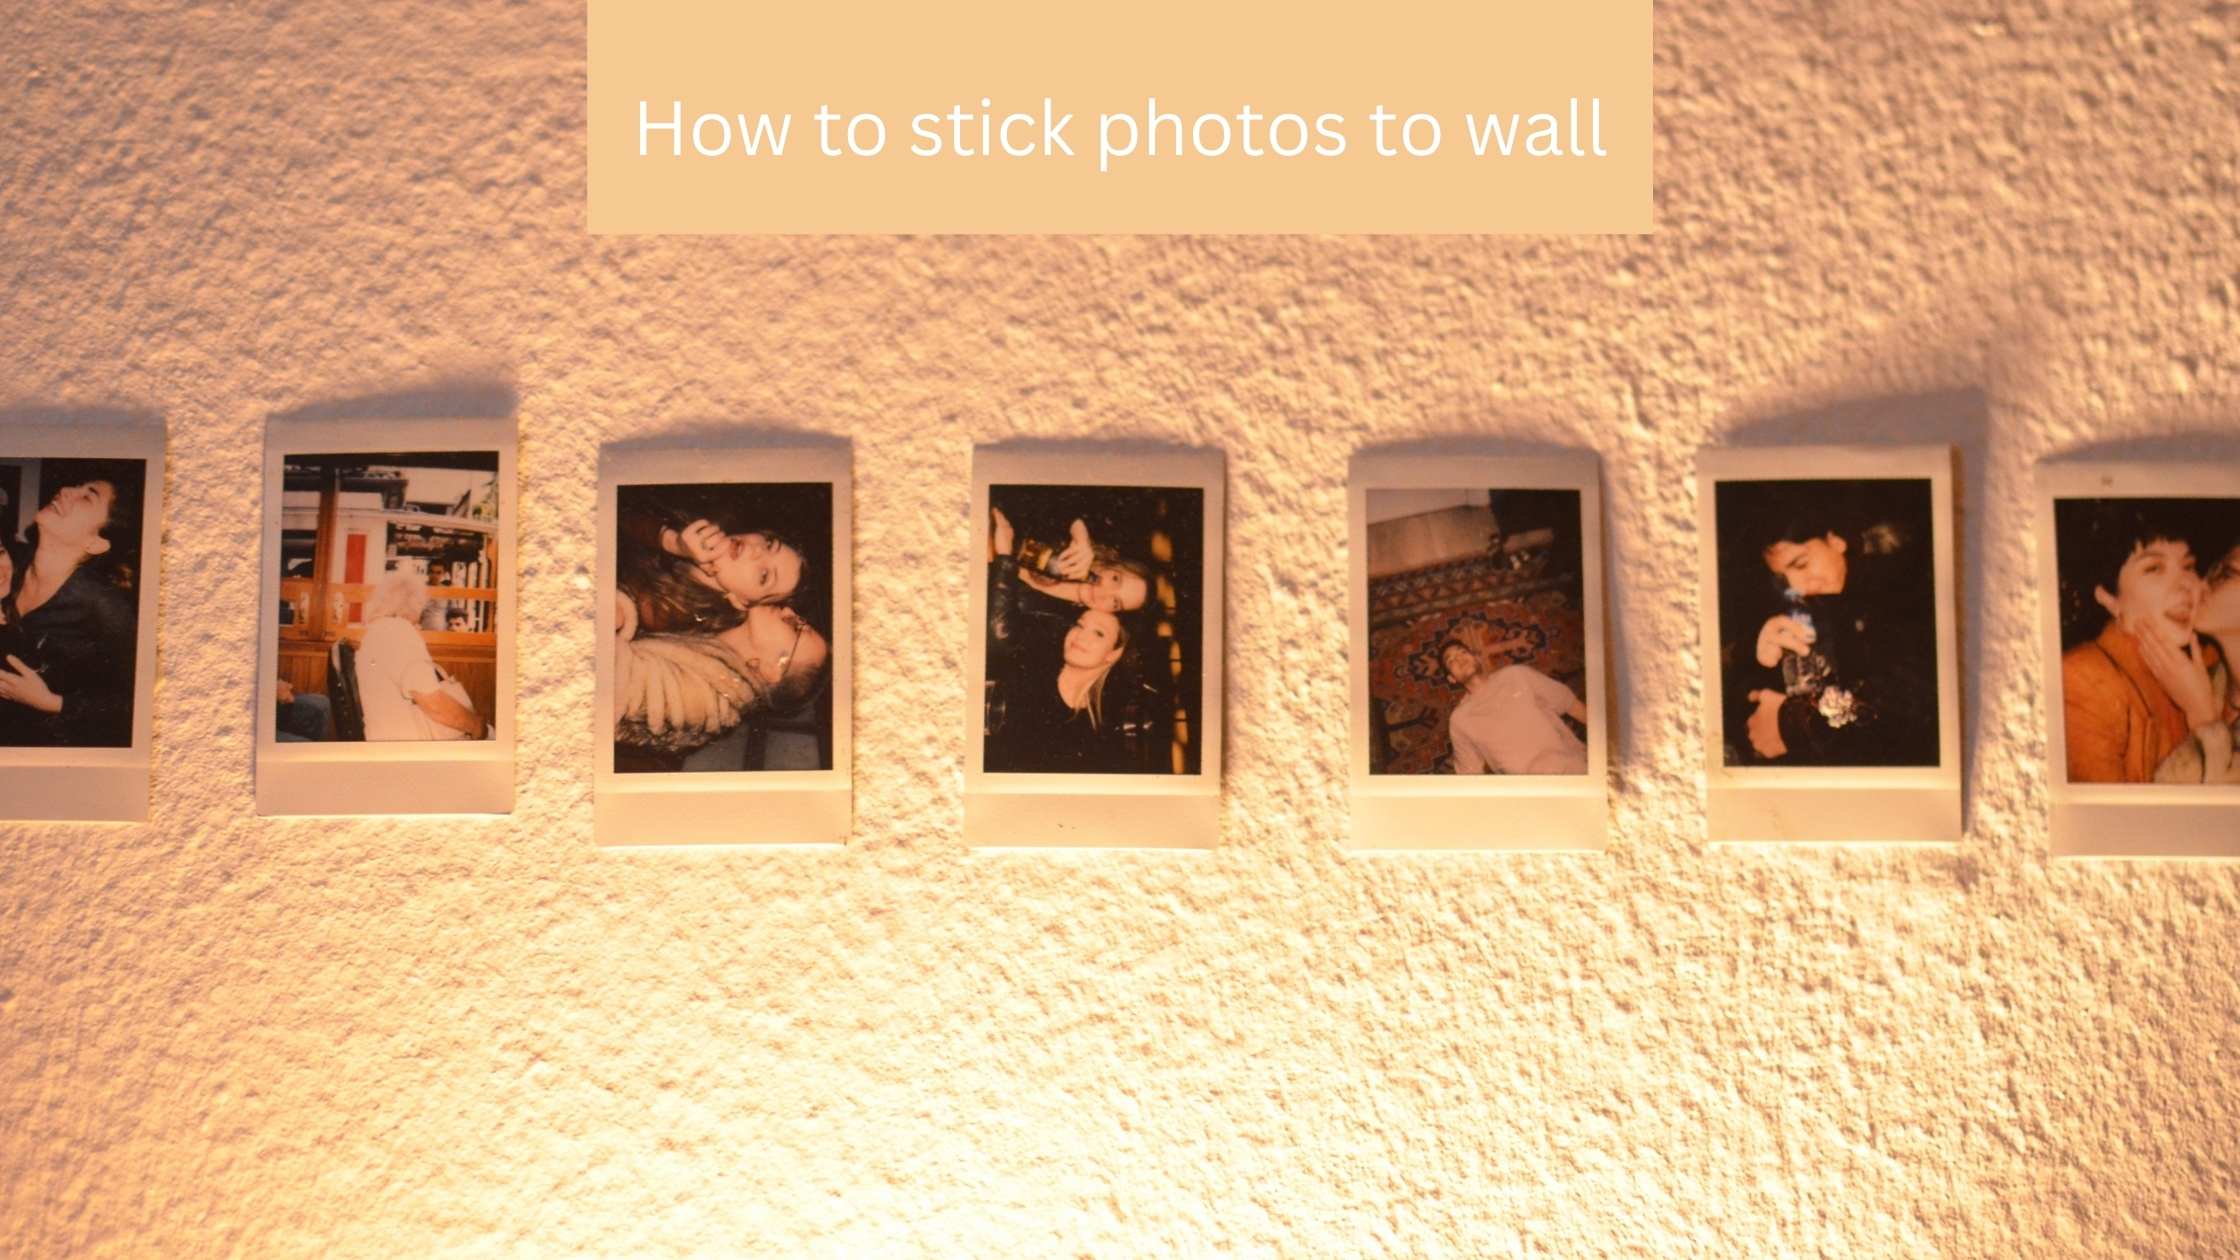 How to stick photos to wall